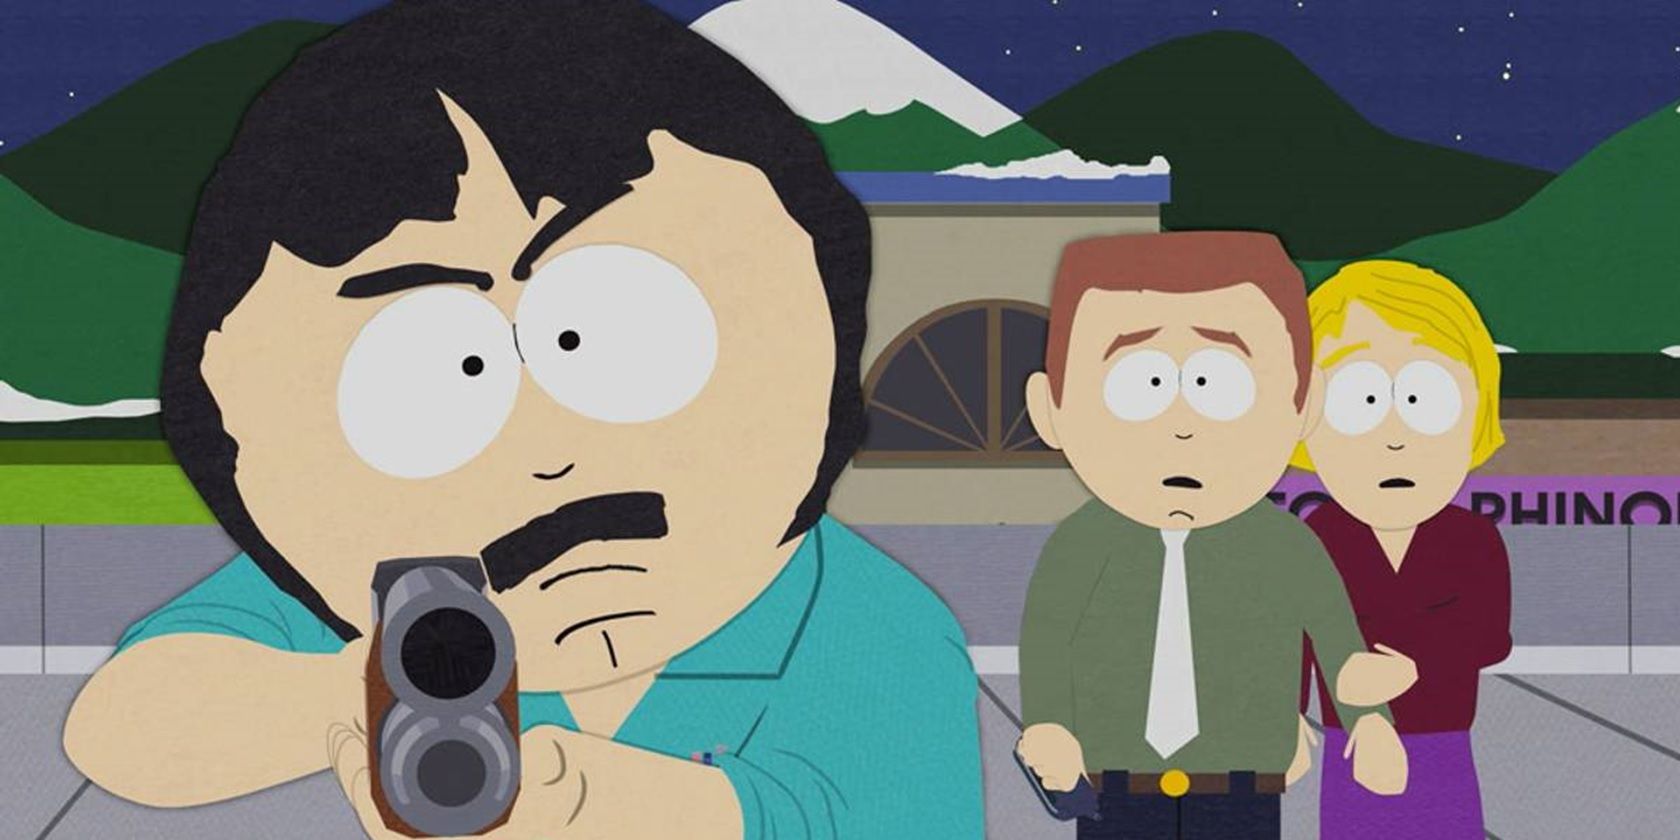 Randy with a shotgun in South Park